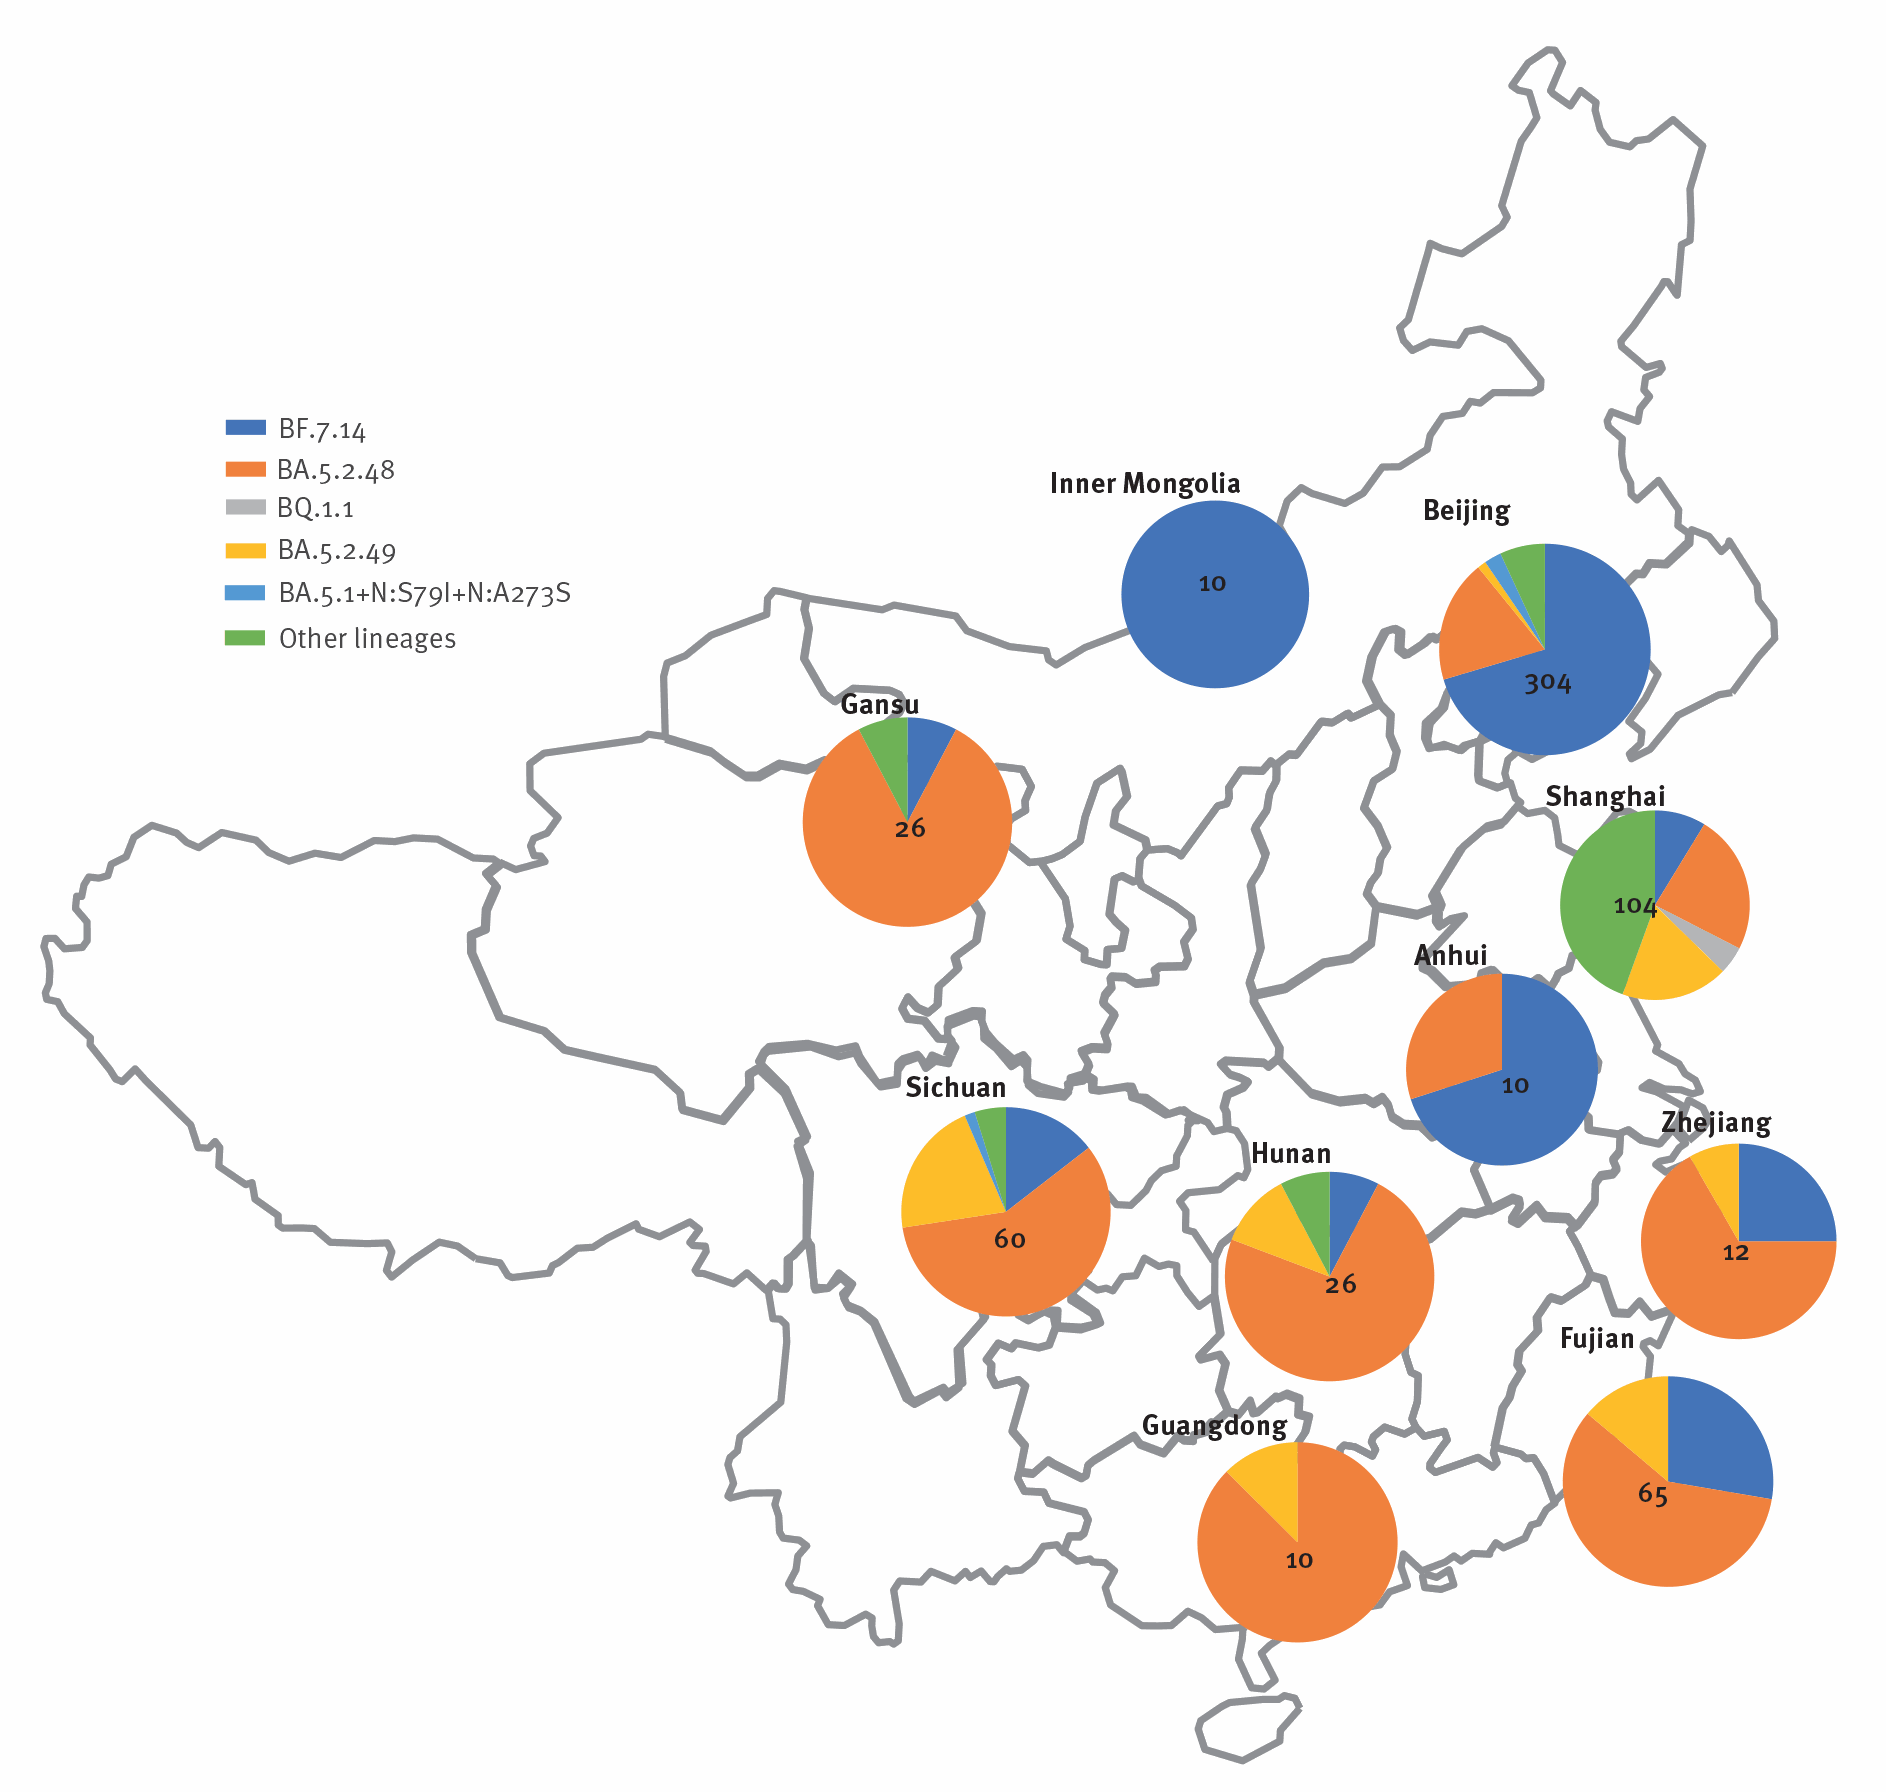 Geographic distribution by province of Omicron a sub-lineages among sequences with case date after 1 September 2022 deposited from China in GISAID as of 11 January 2023 (n = 627 sequences) an Omicron (Phylogenetic Assignment of Named Global Outbreak (Pango) lineage B.1.1.529). b In the respective metadata, the deposited sequences were not labeled as ‘imported.’ Other lineages include BA.5.2 (n = 9), BF.21 (n = 3), BF.7 (n =1), BA.5.1 (n = 8)in Beijing, BA.2 (n = 4), BA.5 (n = 1), BA.5.1 (n = 1), BA.5.2.1 (n = 4), other BA.5.2.* (n = 34), BE.1.4.2 (n = 1), BF.7 (n = 3), BQ.1 (n = 1), BQ.1.1 (n = 4), BQ.1.1.4 (n = 1), BQ.1.23 (n = 1), CH.1.1 (n = 1) in Shanghai, BA.5.2 in Gansu (n = 2), BA.5.2 in Huanan (n = 2), BA.5 (n = 1) and BA.5.2 (n = 1) in Guangdong, and BA.5.1 (n = 1) in Sichuan. The disks (pie charts) are subdivided according to the proportion of each sub-lineage found. The numbers at the centers of the disks represent the total number of characterized viral sequences originating from the provinces in question.